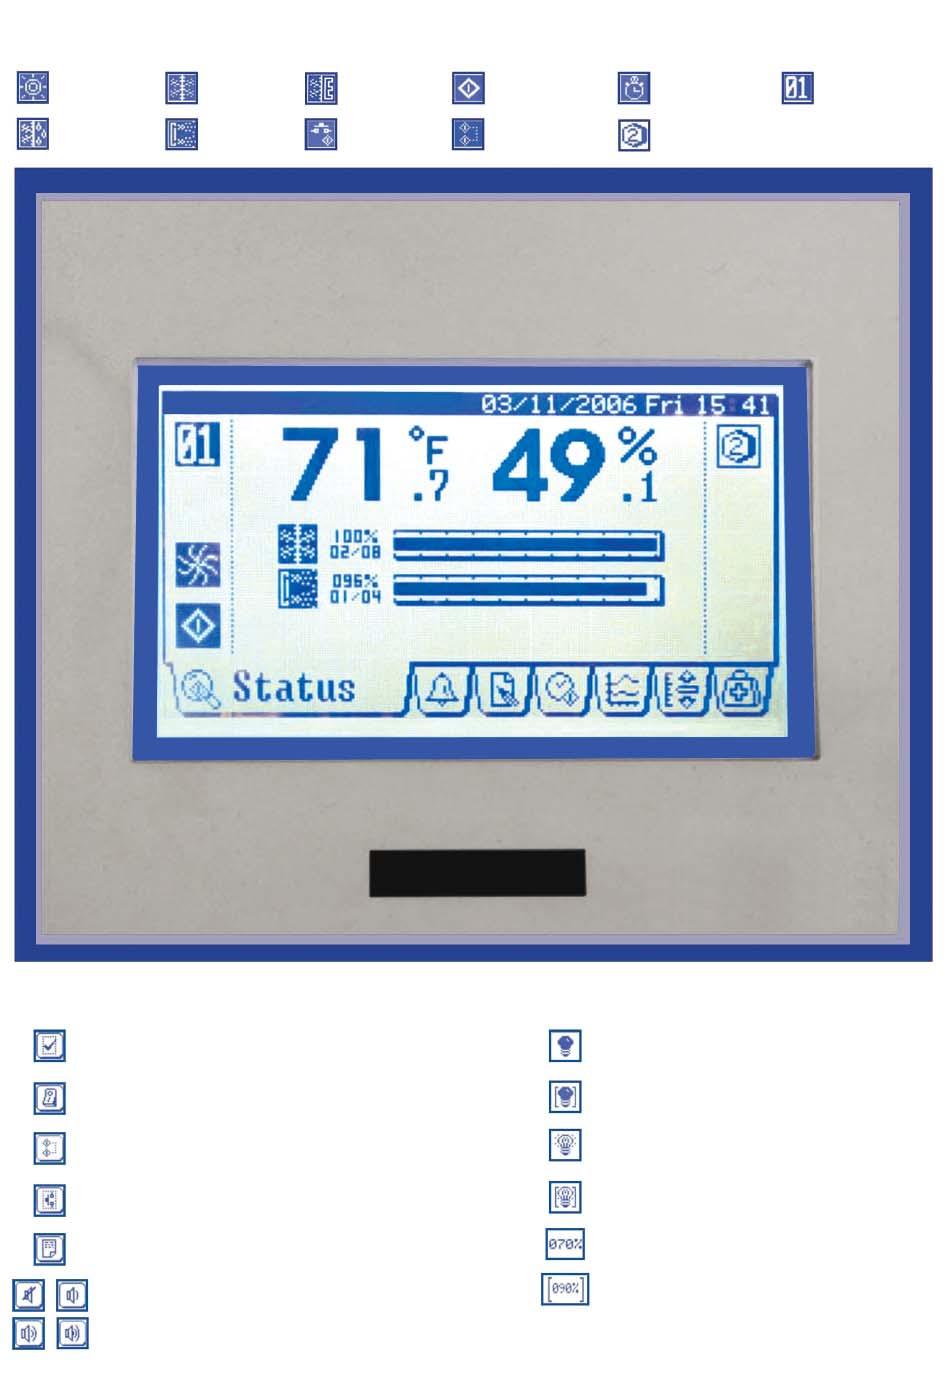 PROCESS STATUS & OPERATION ICONS Heating Cooling Free Cooling (3 rd bar when active) Local on/off control via control panel Programmed timer schedule auto on/off Network Address Dehumidifying